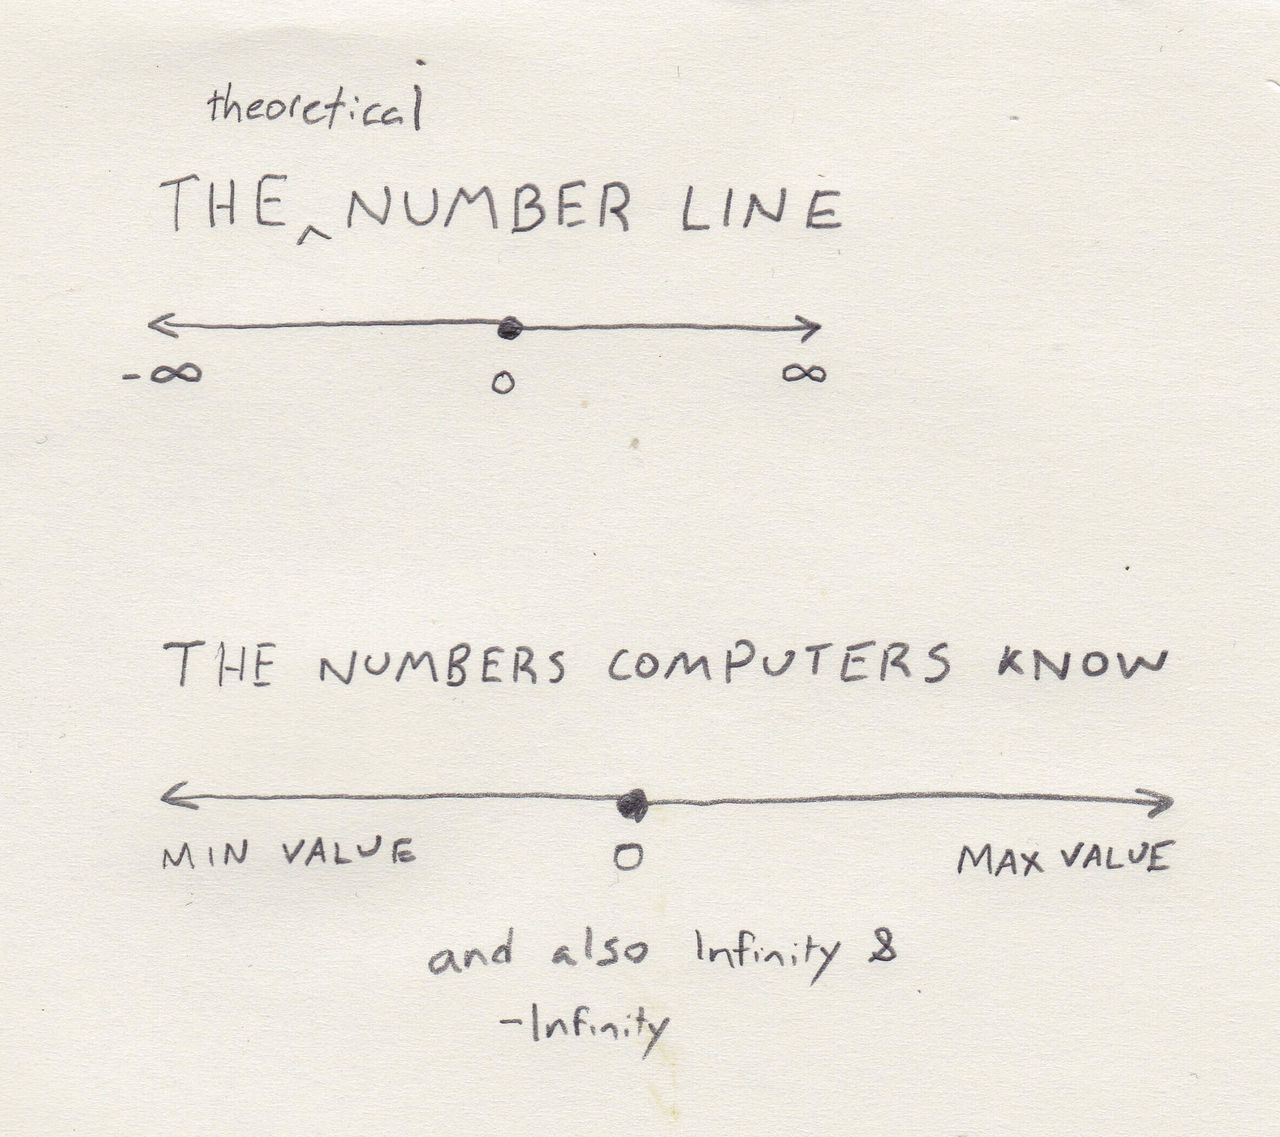 the theoretical number line of math and the number line of computers